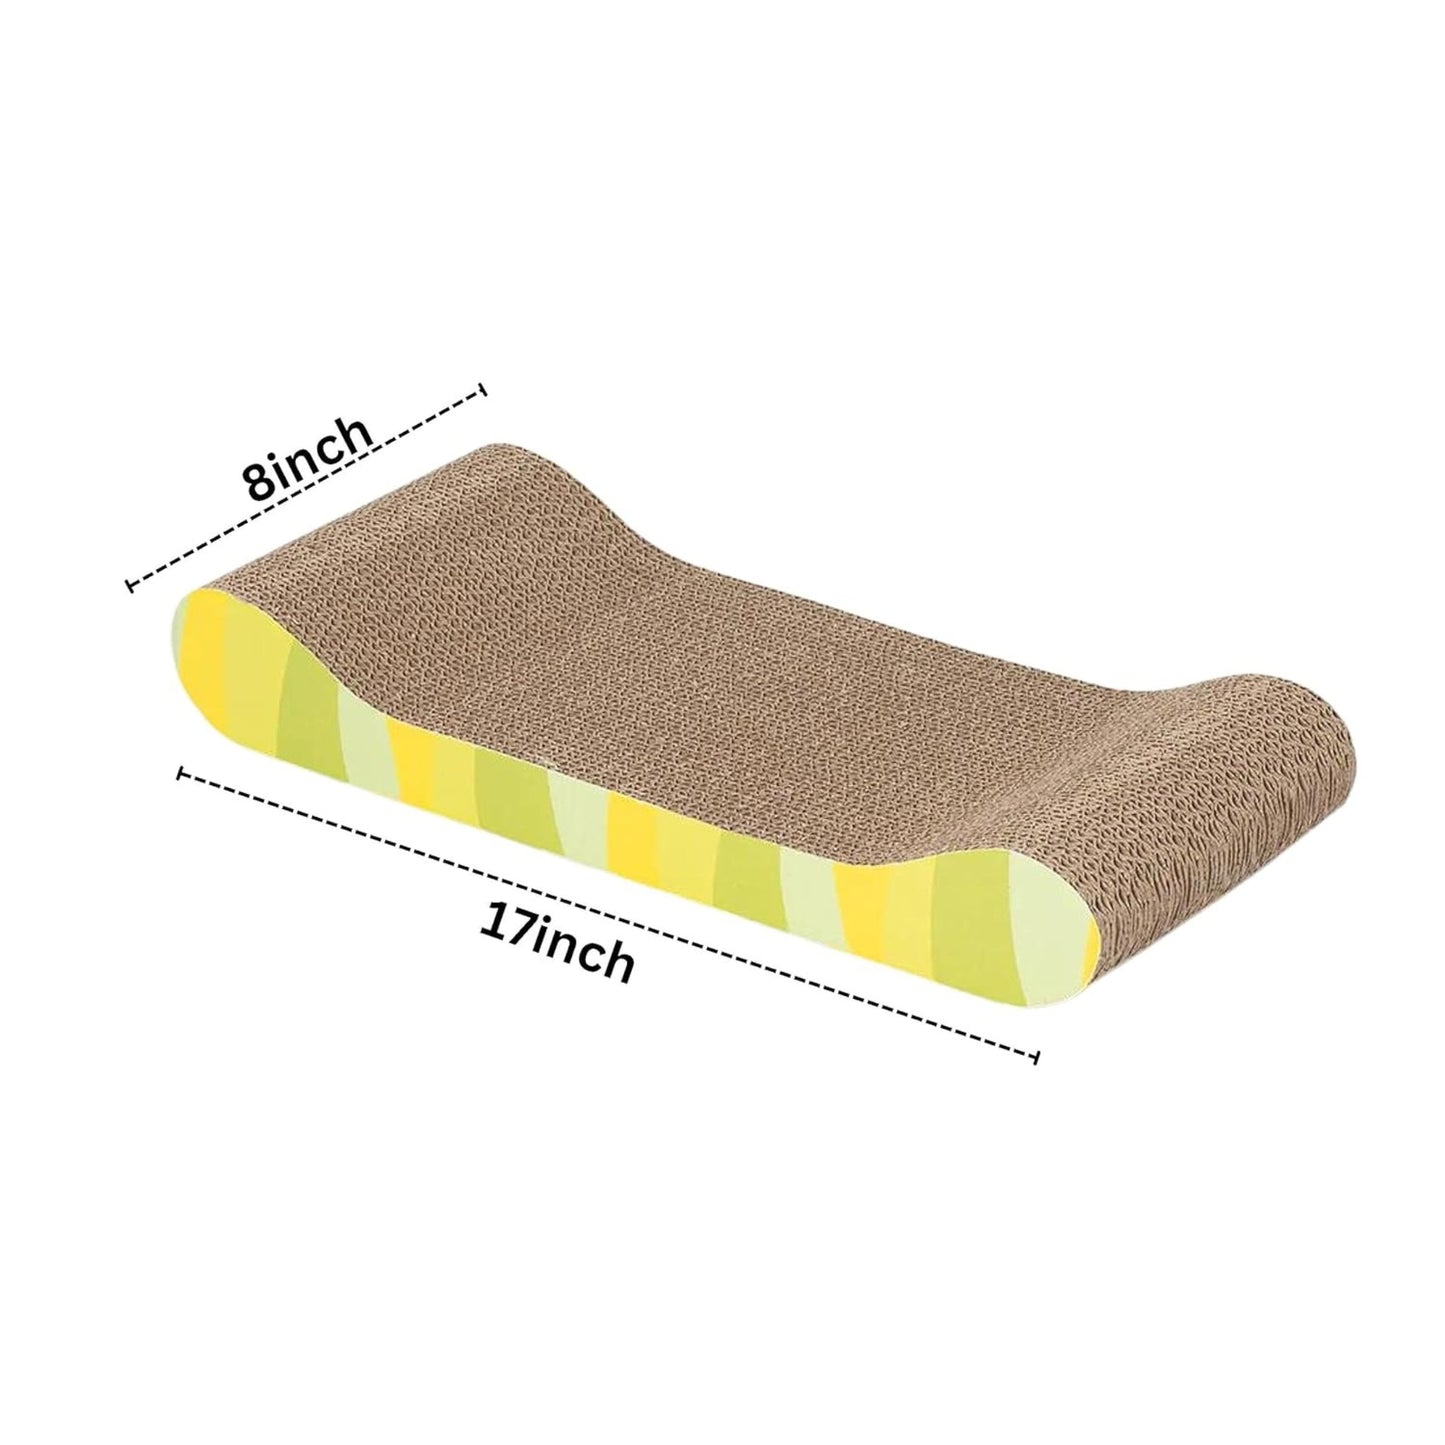 Foodie Puppies Corrugated Couch Scratcher for Cats & Kittens, Pack of 2